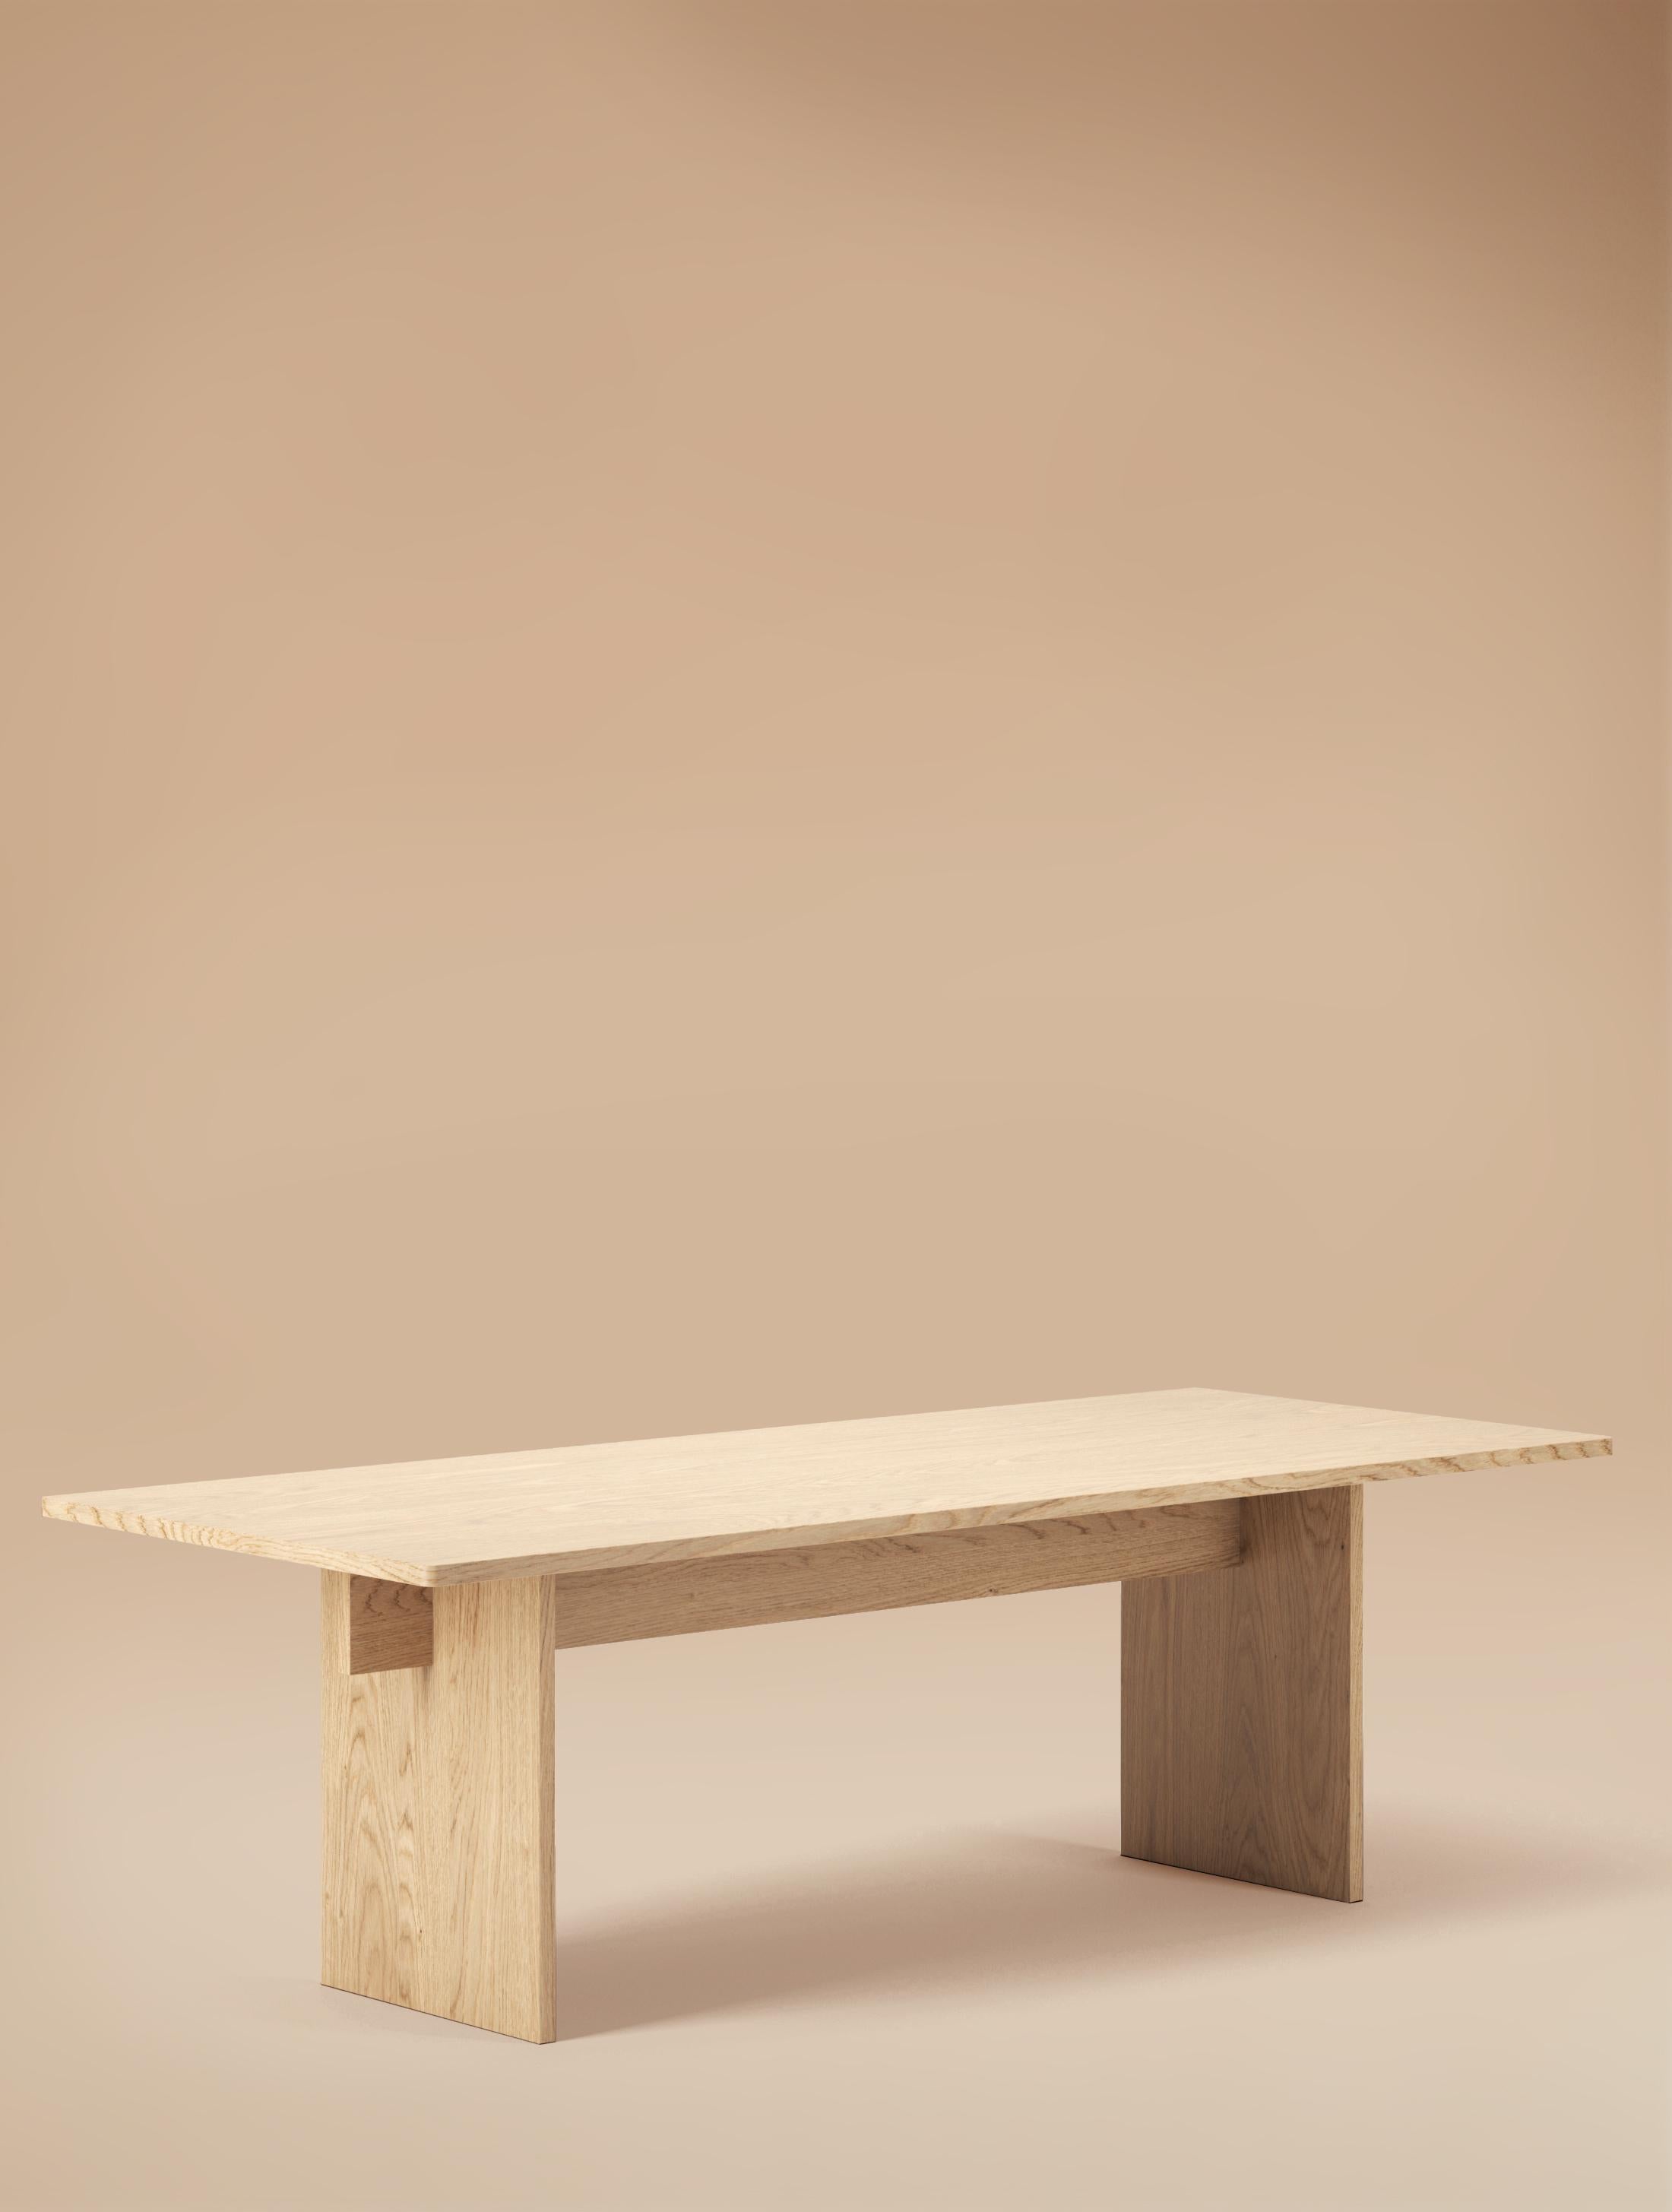 6 Seater Faure Table Handcrafted in Blackened Oiled Oak by Lemon 4